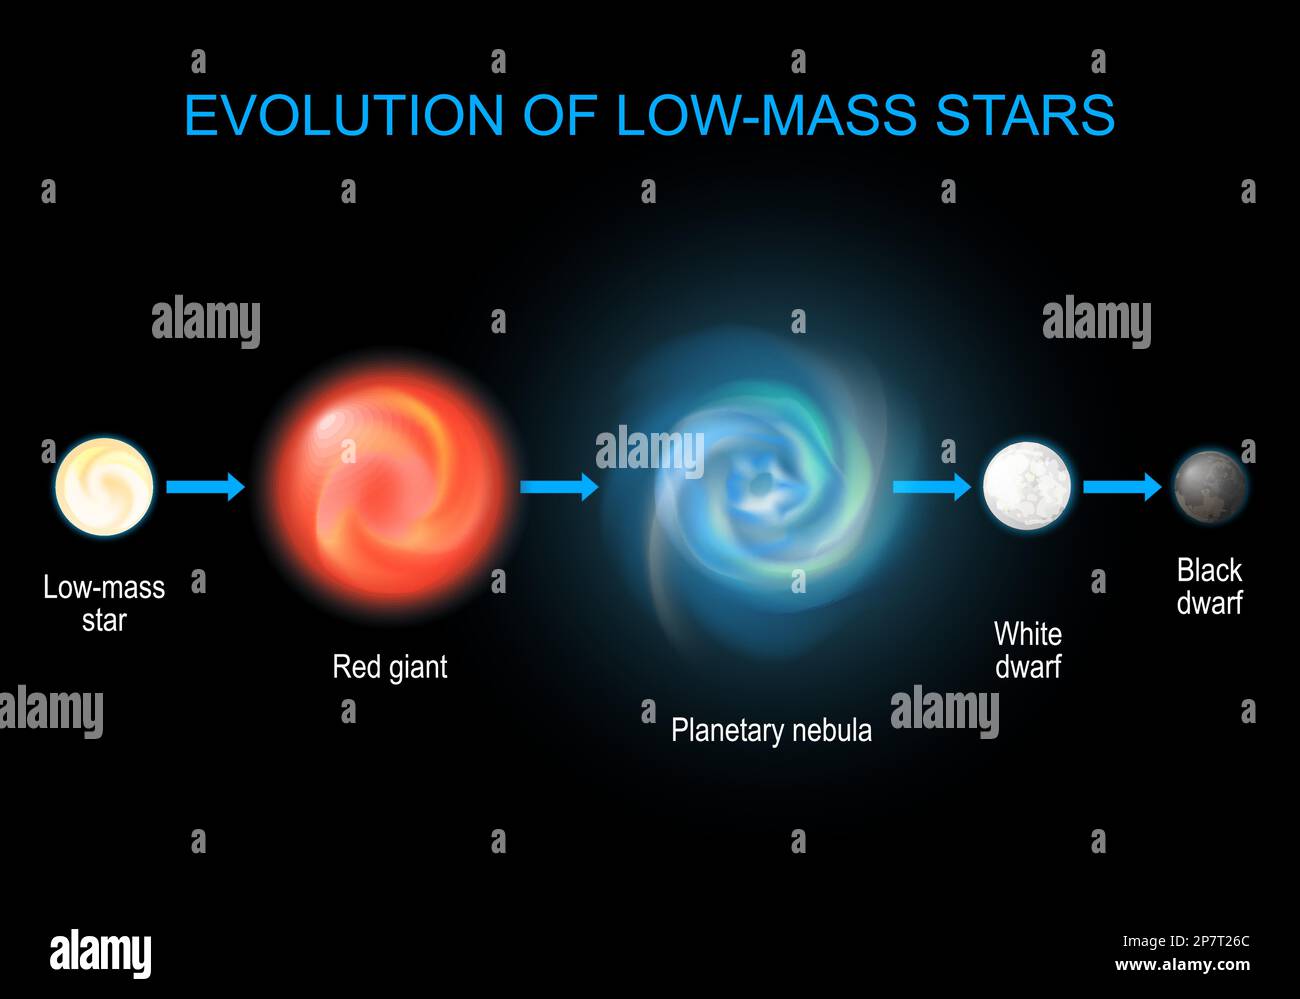 Stellar evolution. Life cycle of low stars from Red giant, and Planetary nebula to Black and White dwarfs. infographic diagram about astronomy. Stock Vector